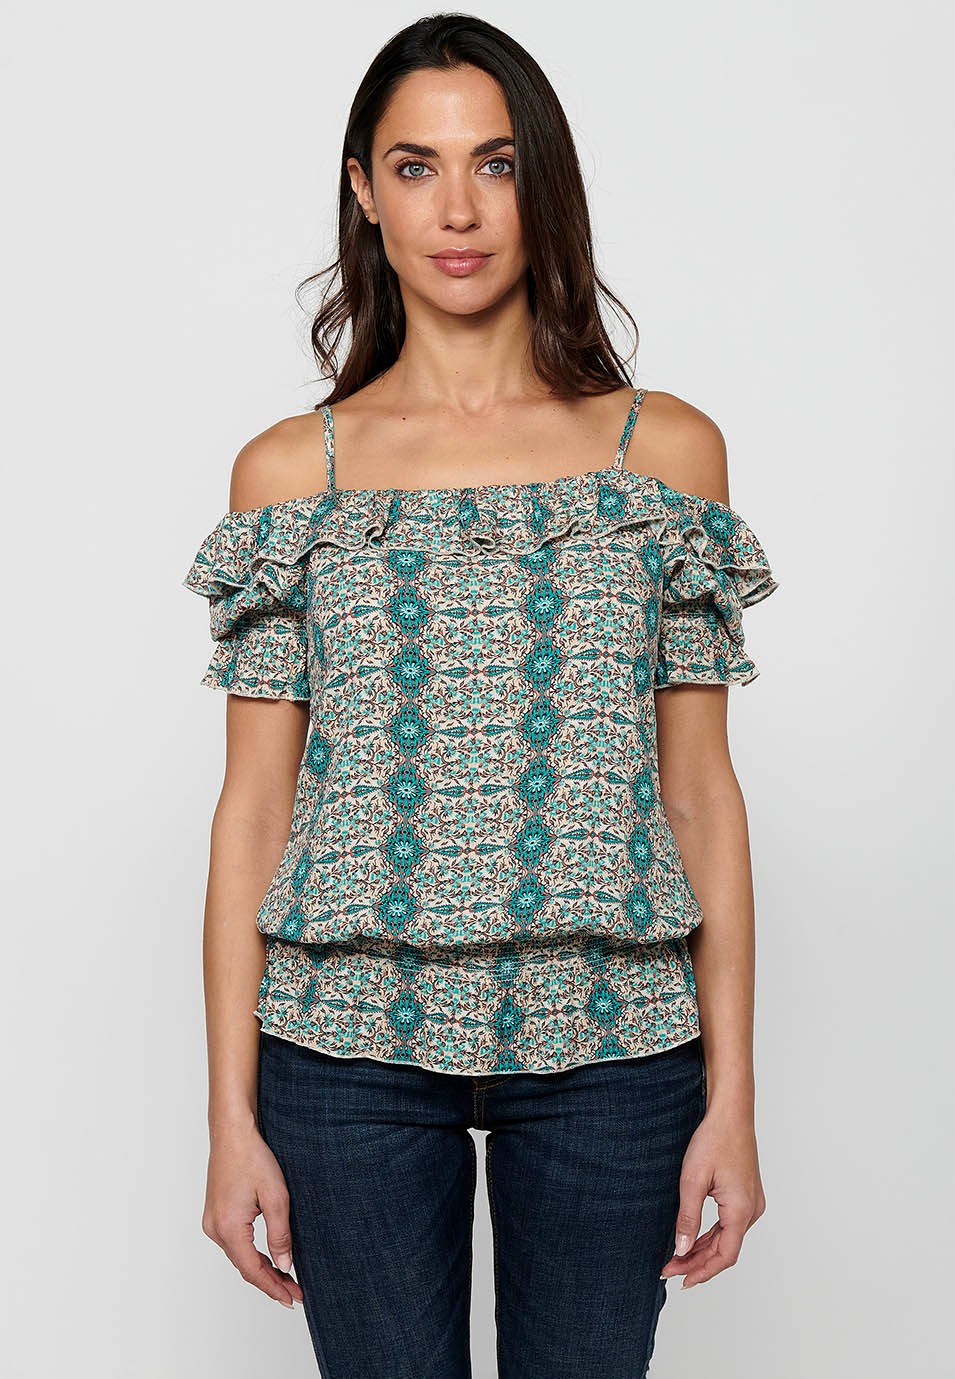 Short Sleeve Blouse with Shoulder Straps and Blue Floral Print for Women 2